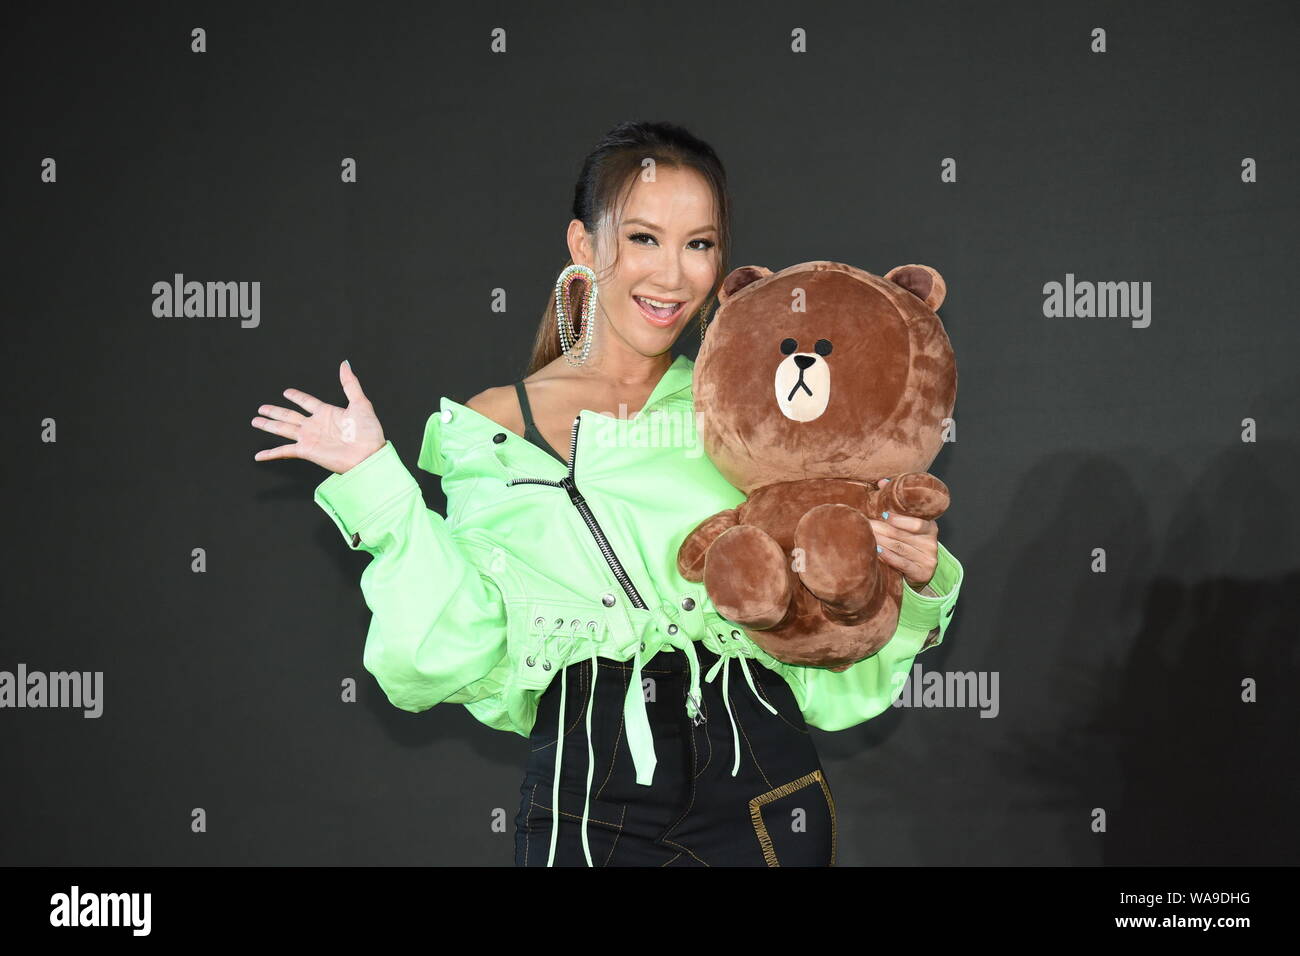 Hong Kong-born American singer Coco Lee attends Line Music promotional event as brand-spokeswoman in Taipei, Taiwan, 10 July 2019. Stock Photo